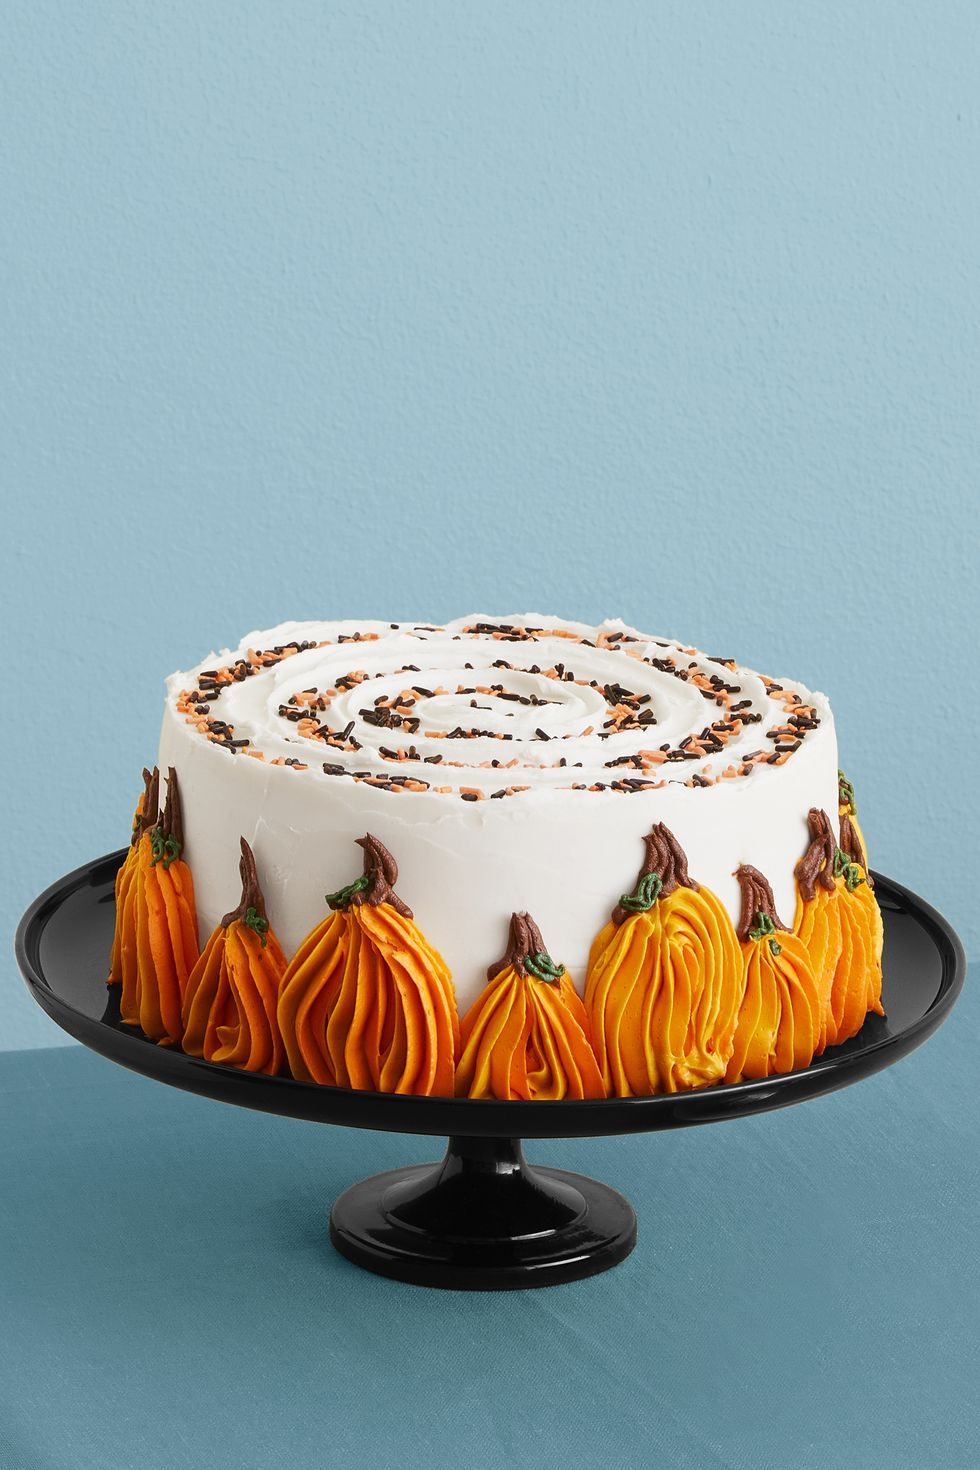 Fall Into Baking: Cakes and Treats Inspired by Autumn | ParentMap